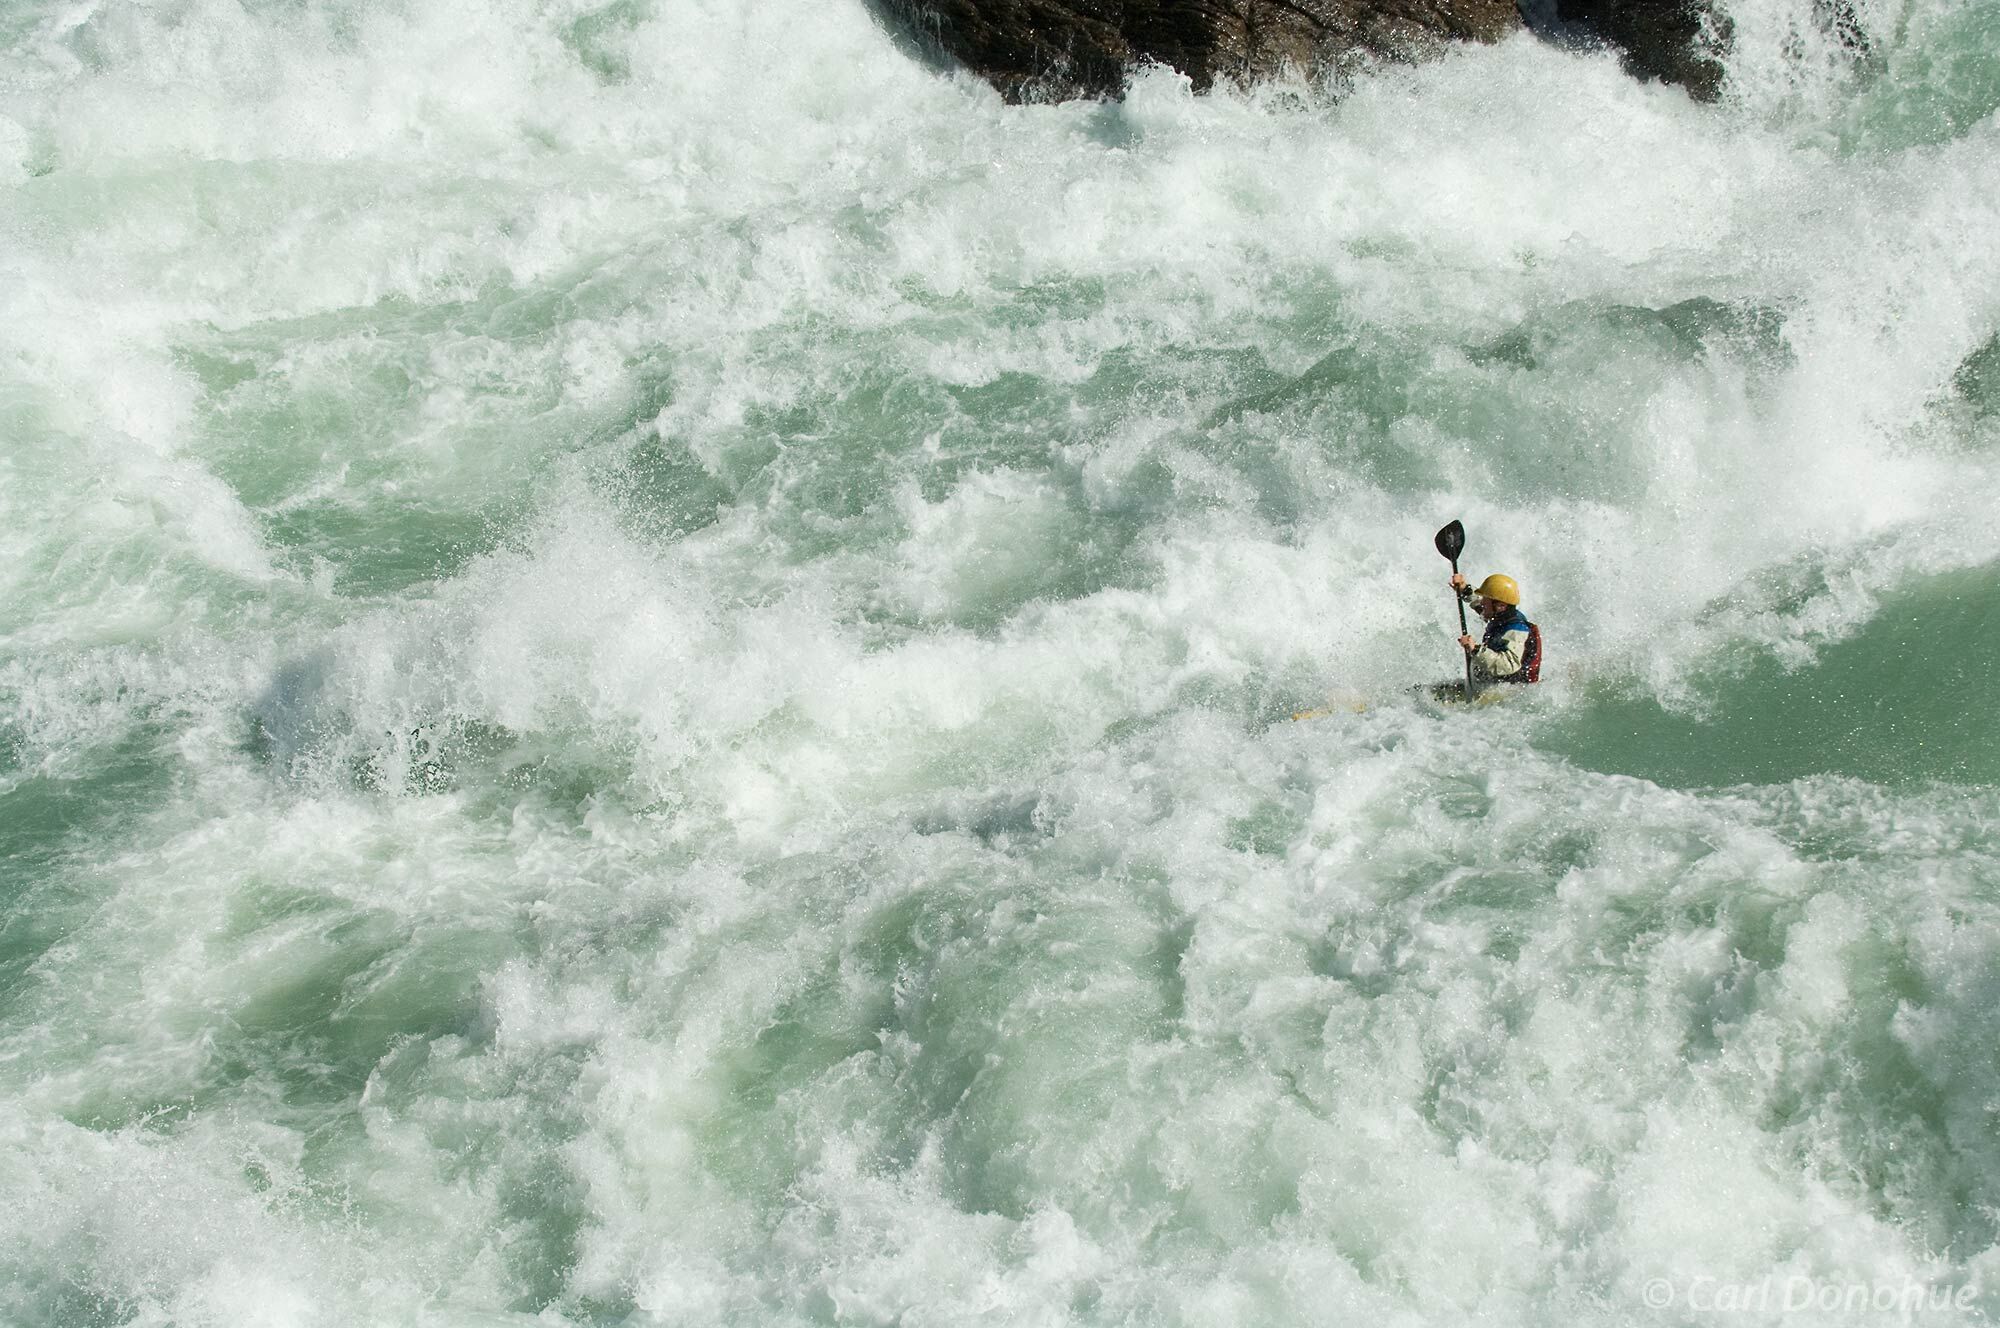 Whitewater kayaking on the Baker River. Class whitewater kayaking. This huge river dwarfs a kayak in this narrow canyon. Whitewater...